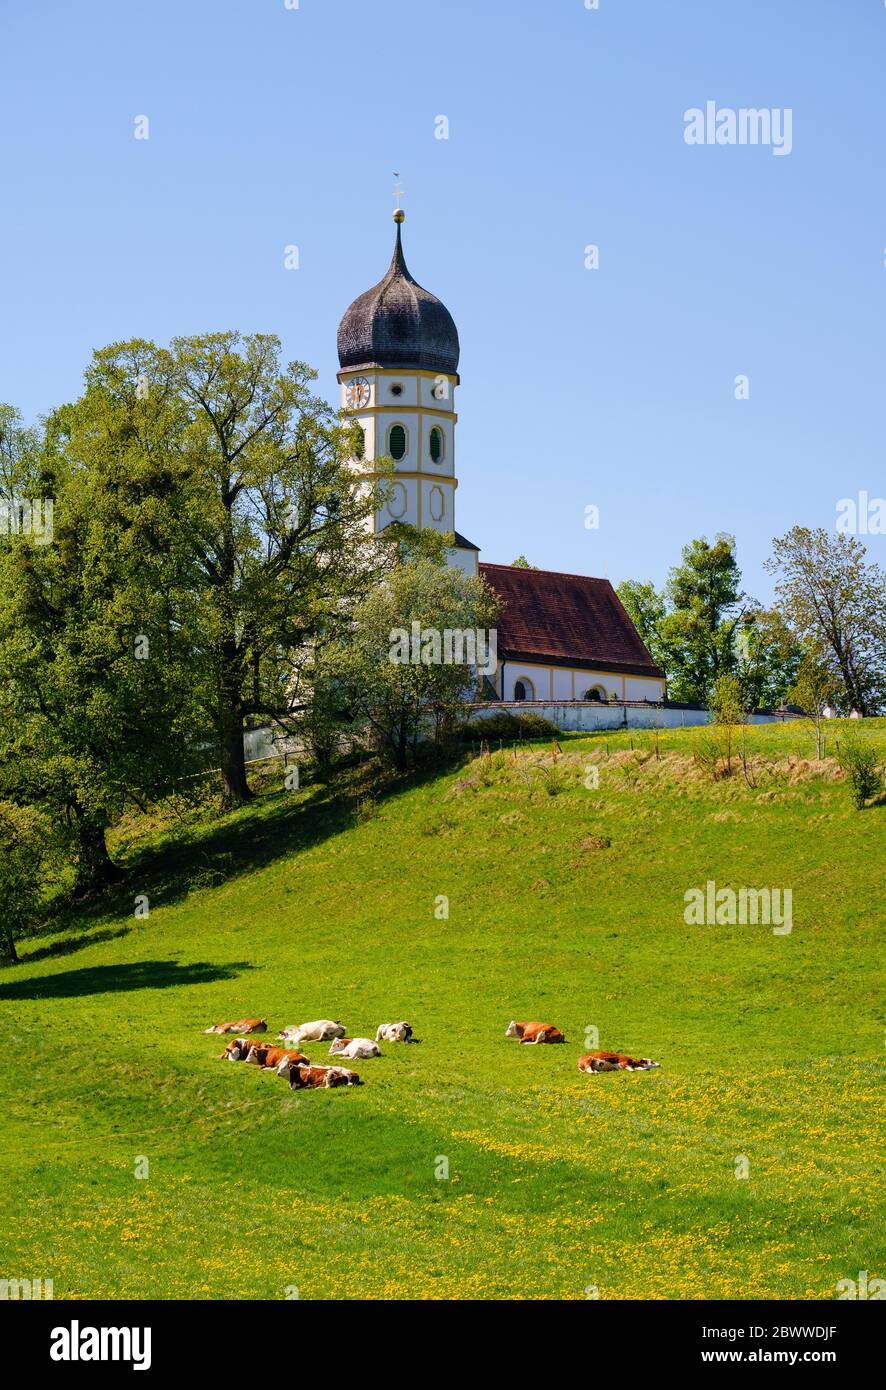 Germany, Bavaria, Munsing, Cattle relaxing in front of Church of Assumption of Virgin Mary in spring Stock Photo